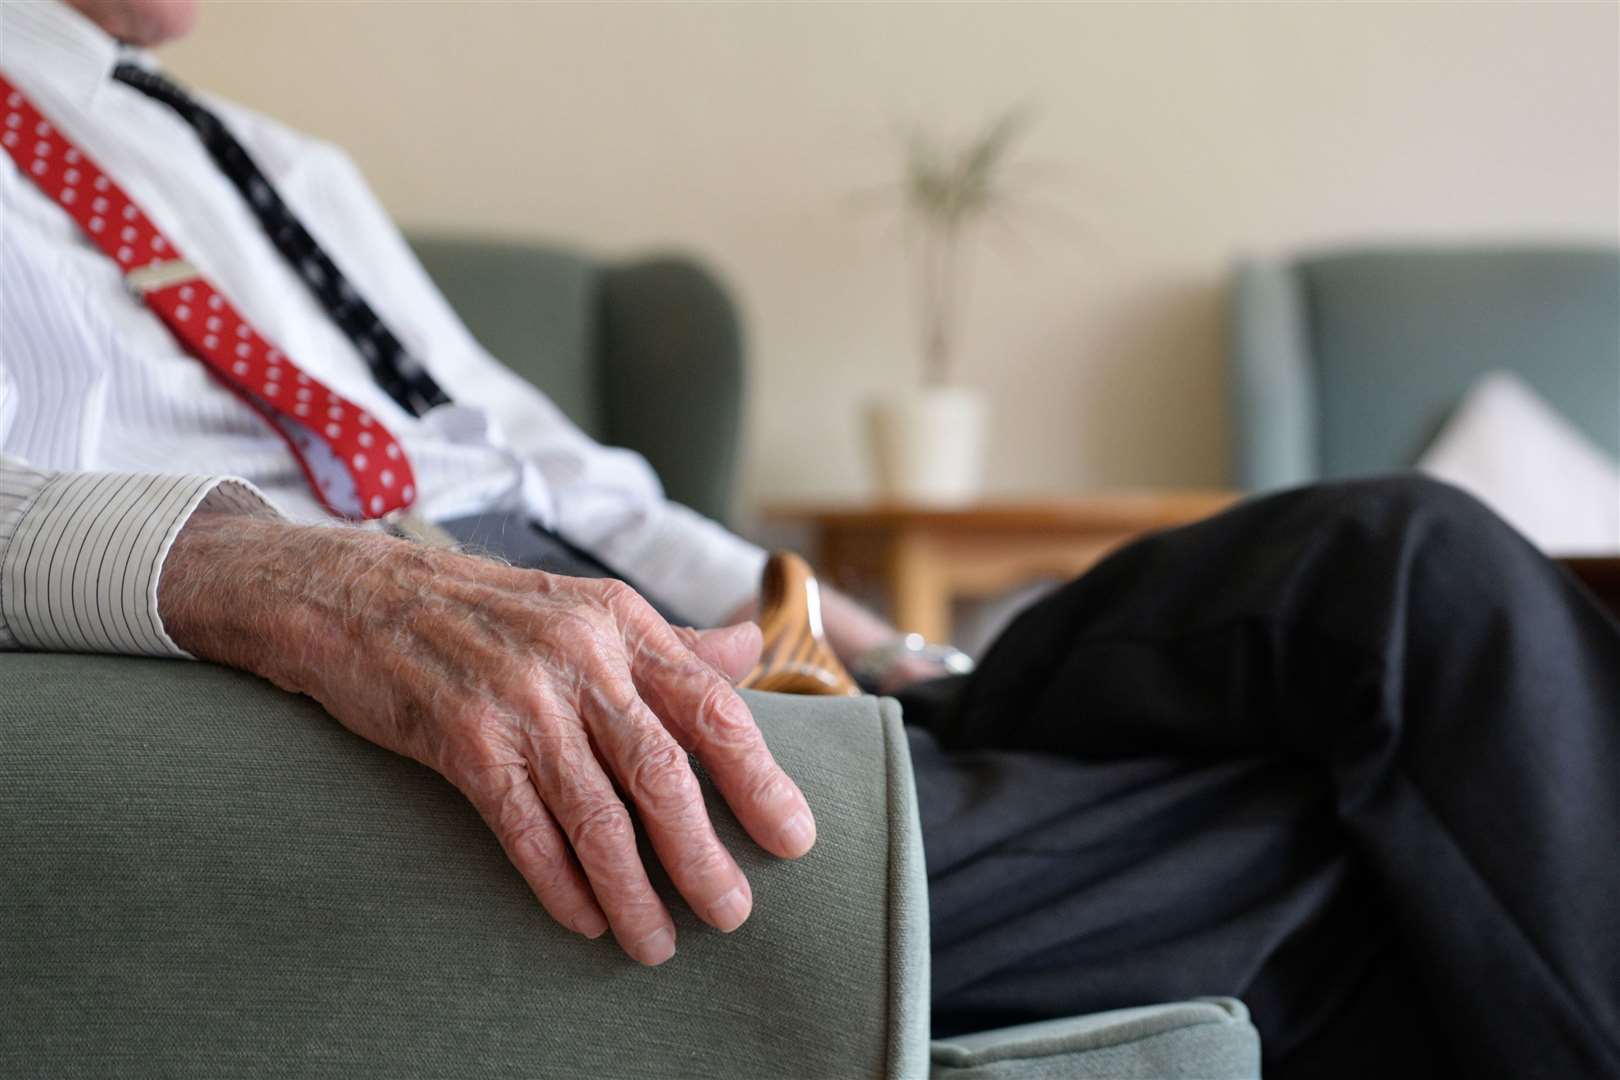 The service provides at home help to the elderly. Stock image